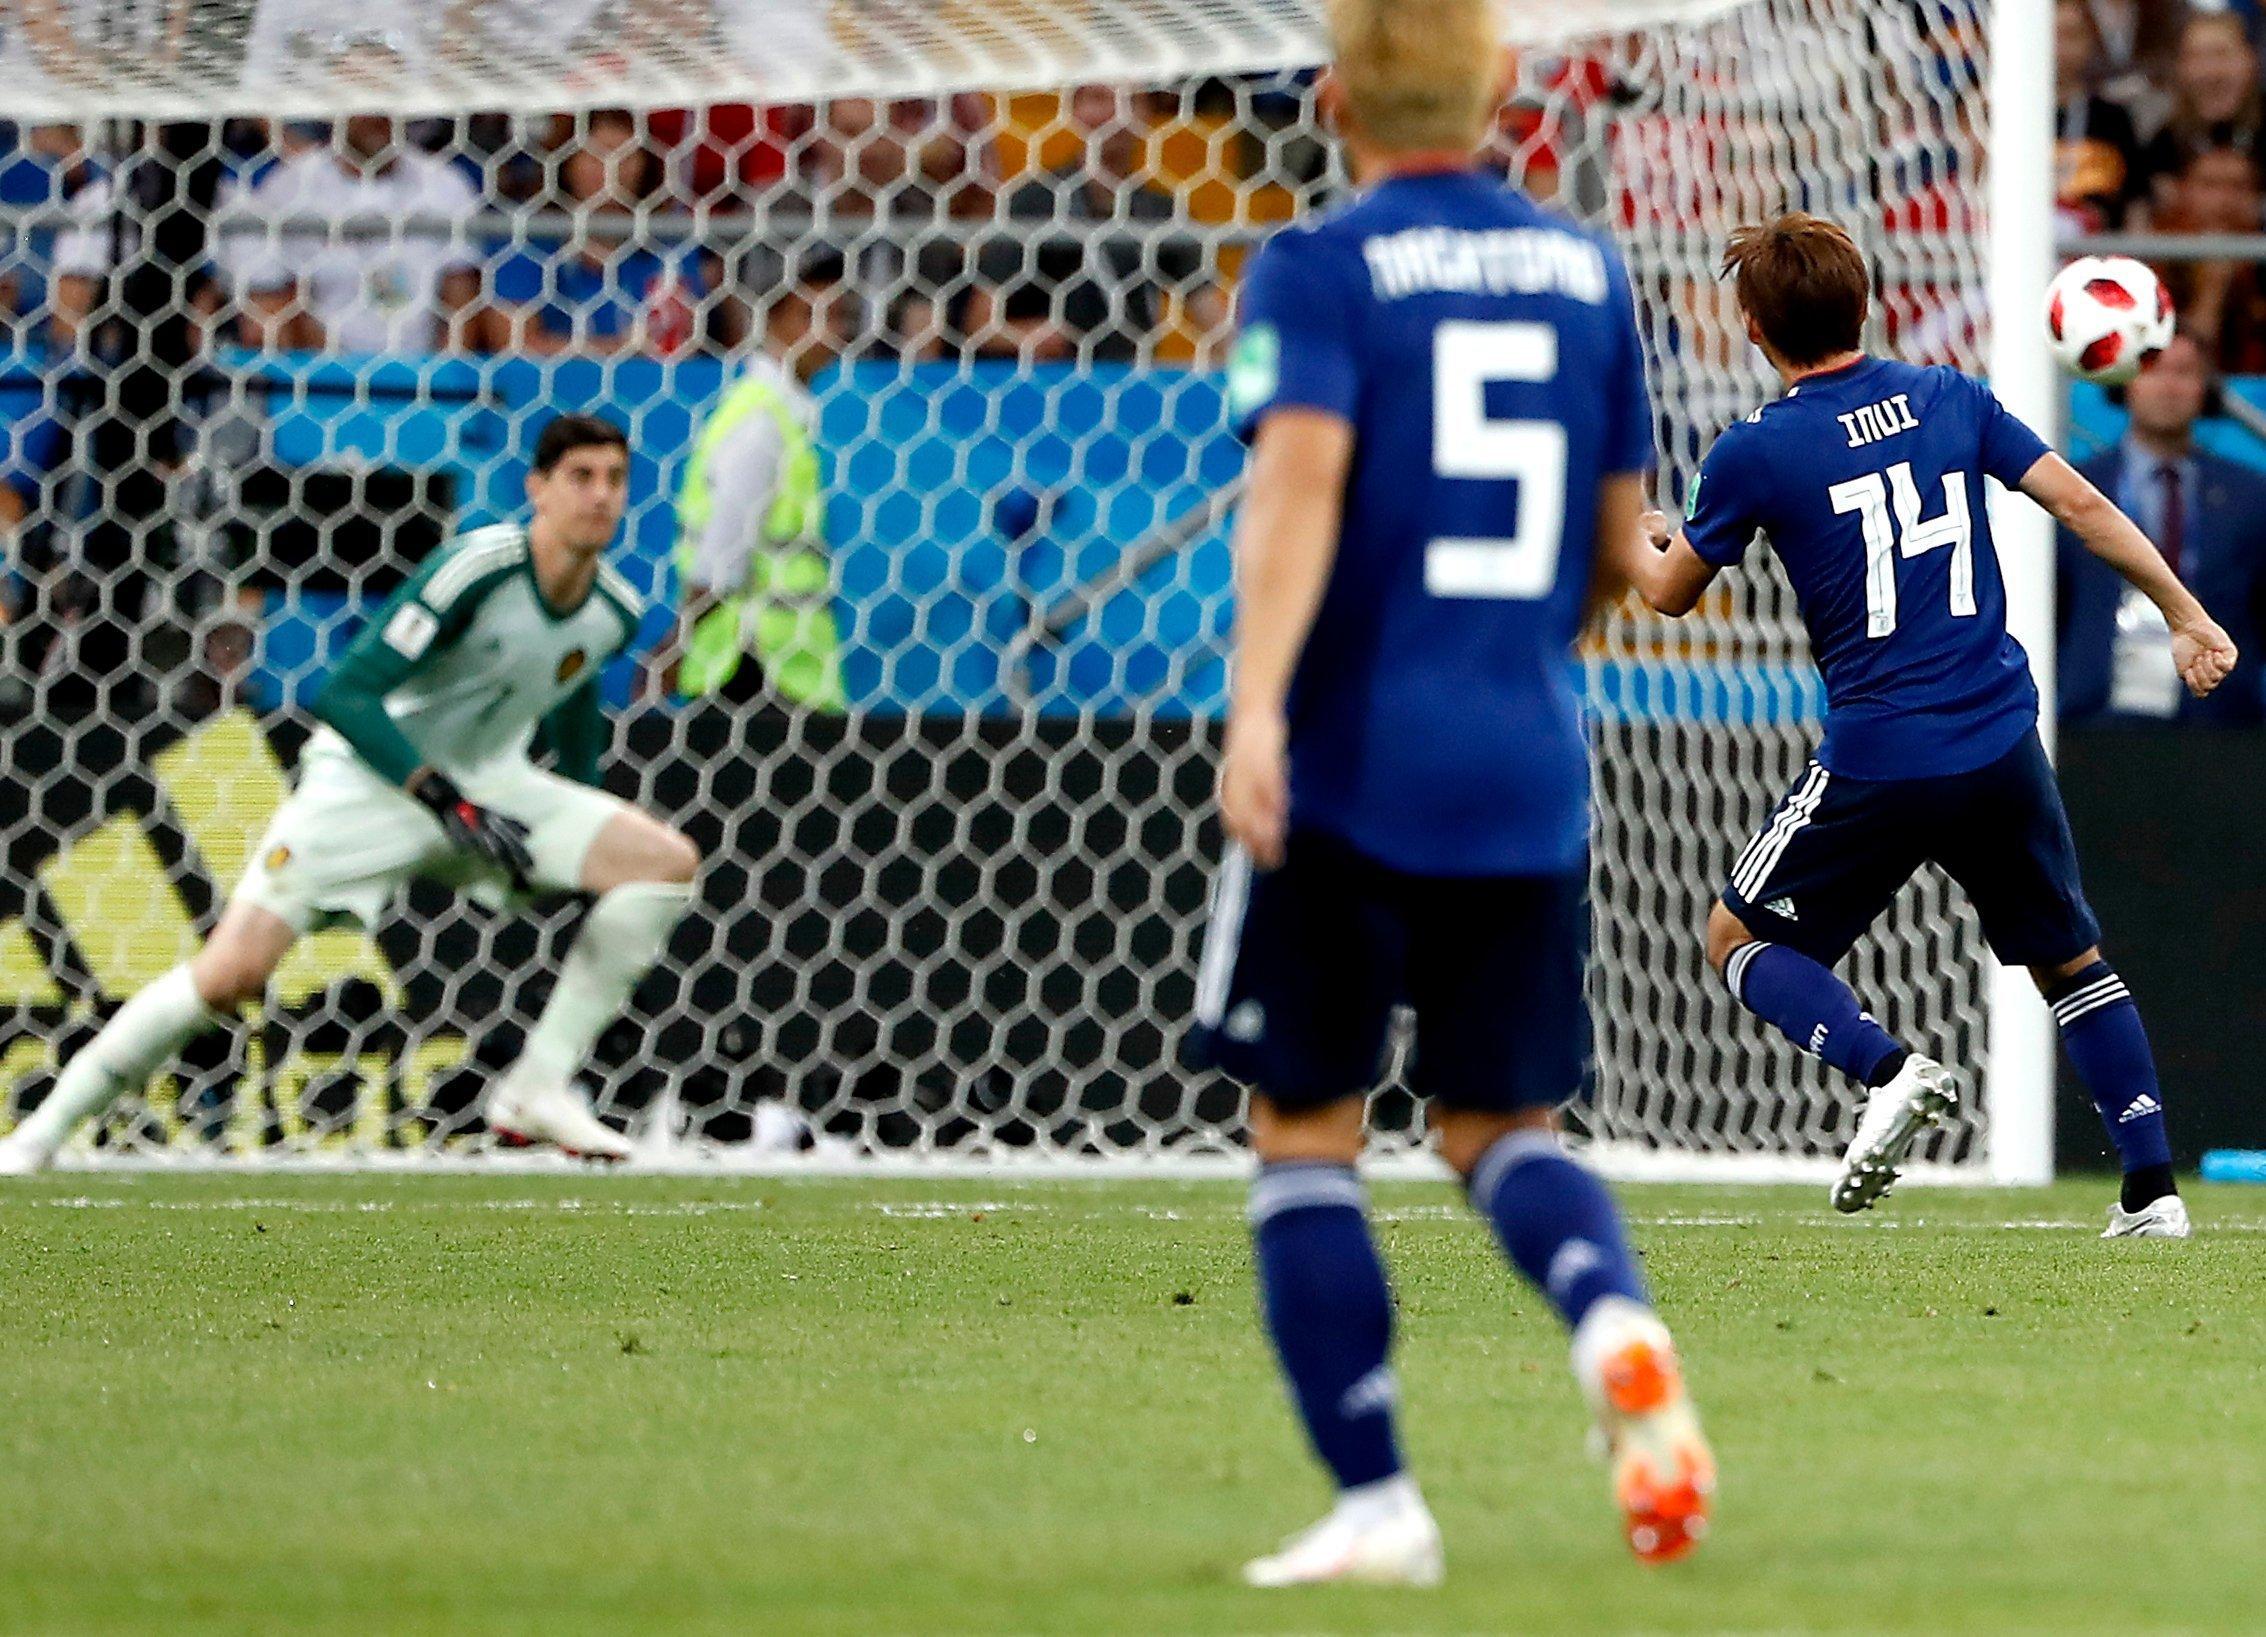 Japan goal 4 FIFA World Cup 2018 : The World Cup of the Underdogs